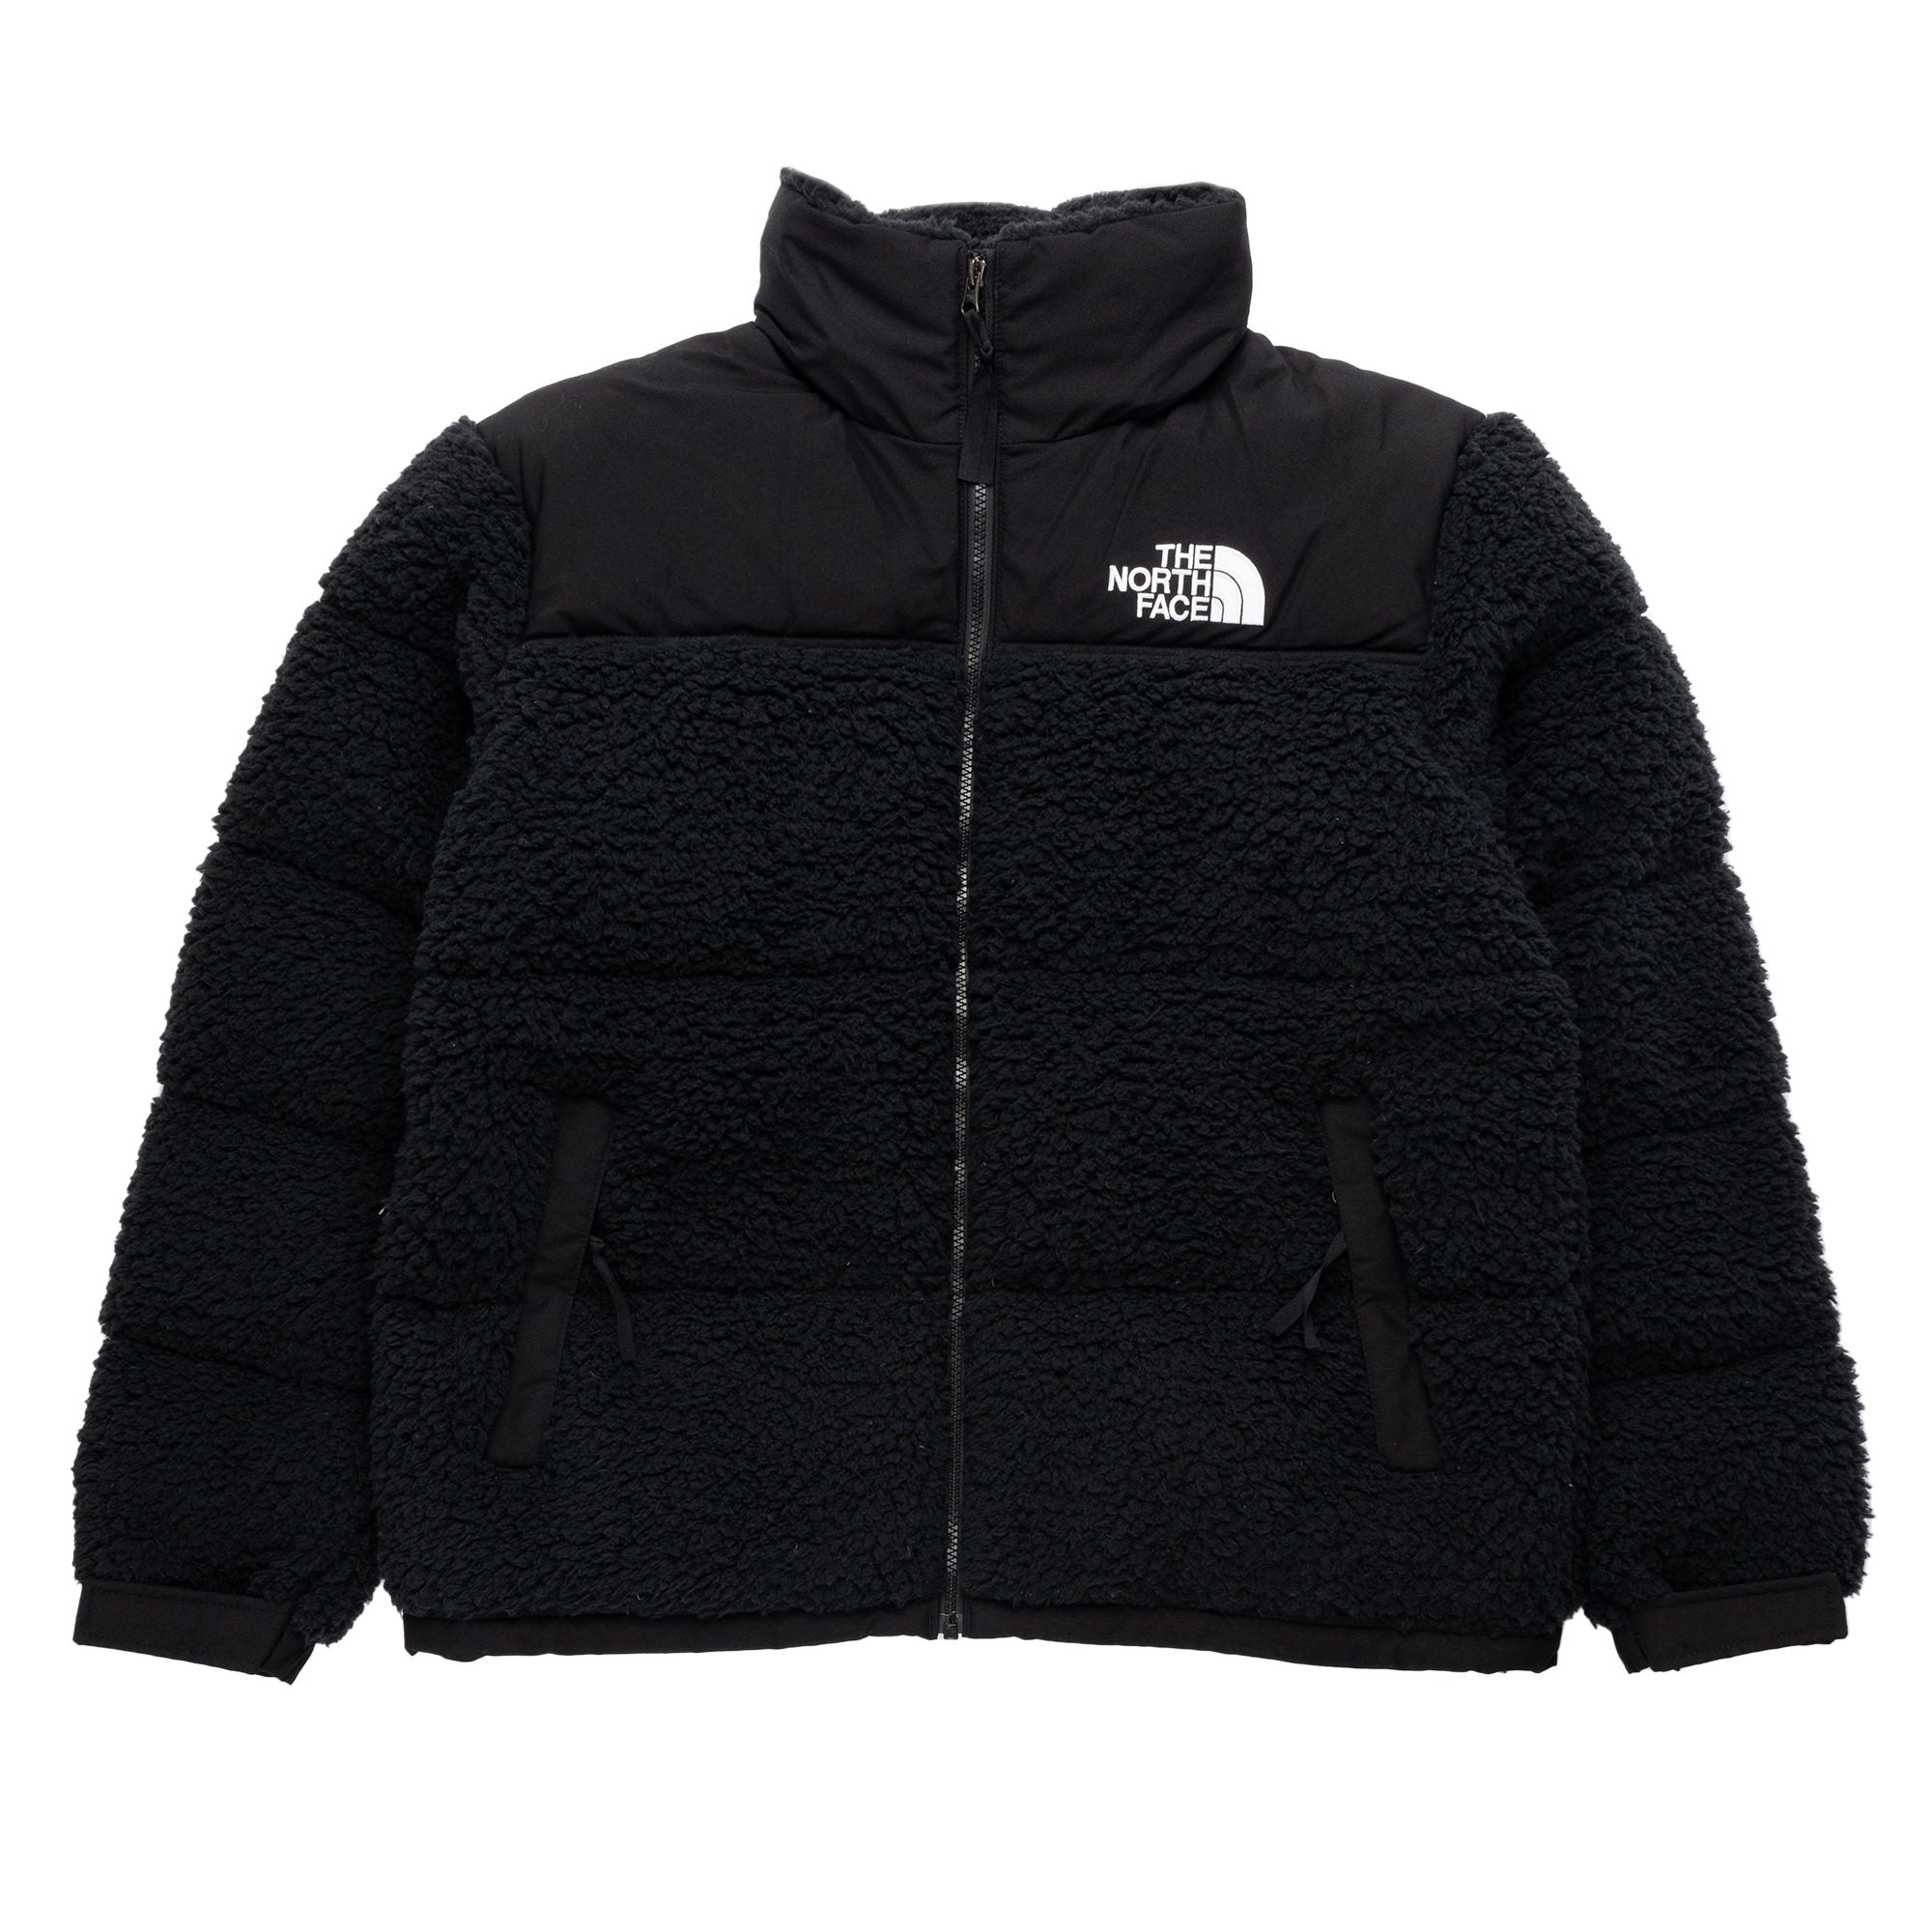 The North Face – Capsule